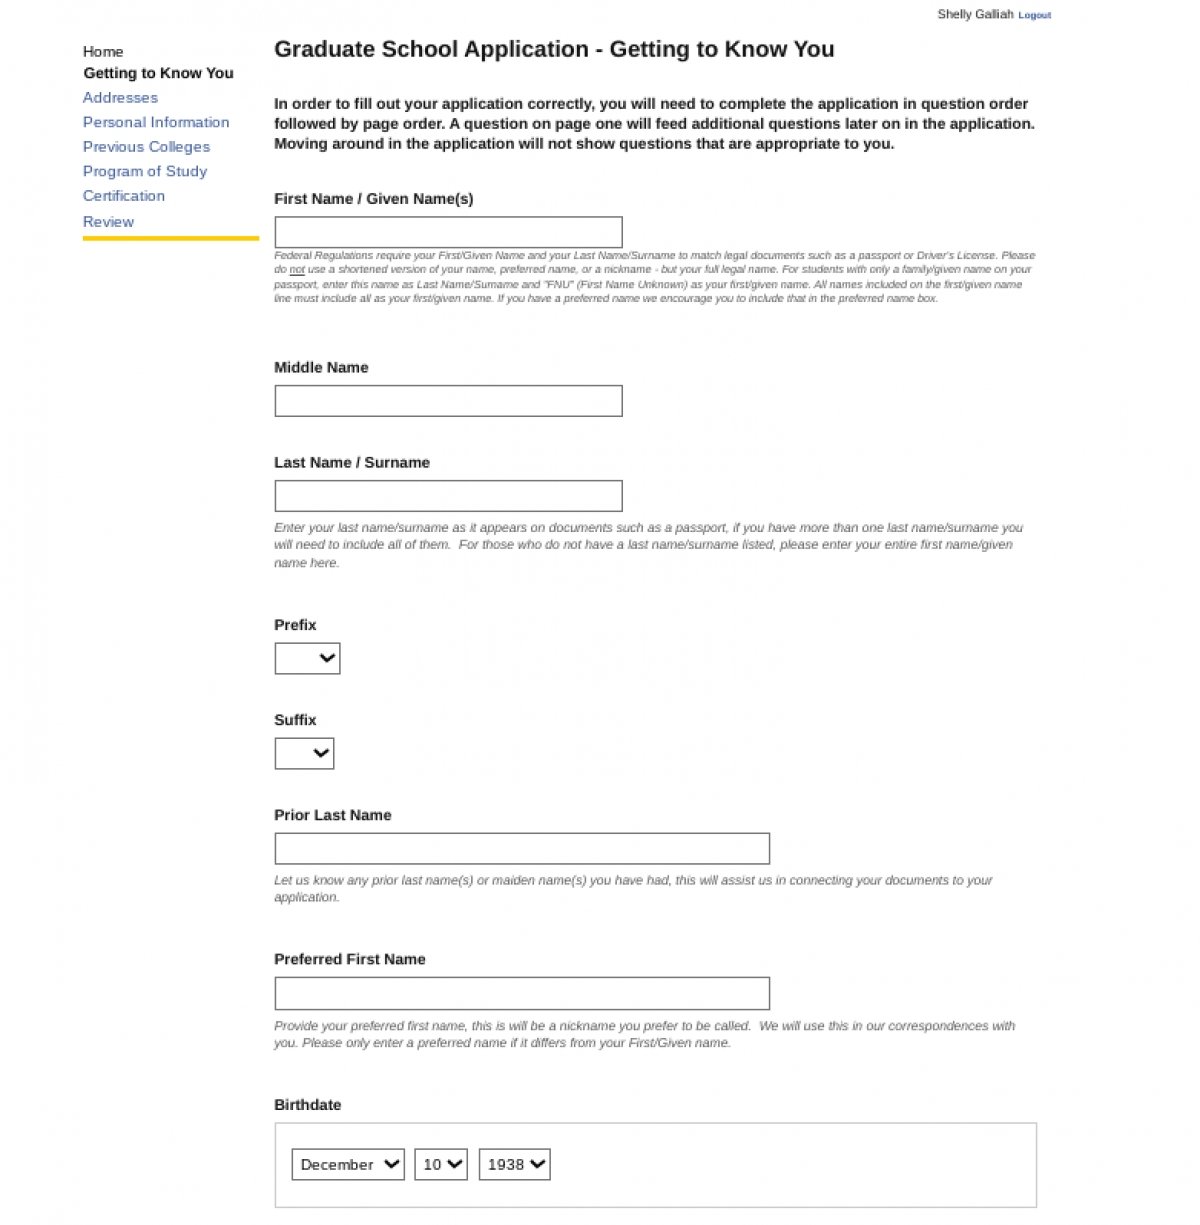 Screenshot of the first page of the application process.